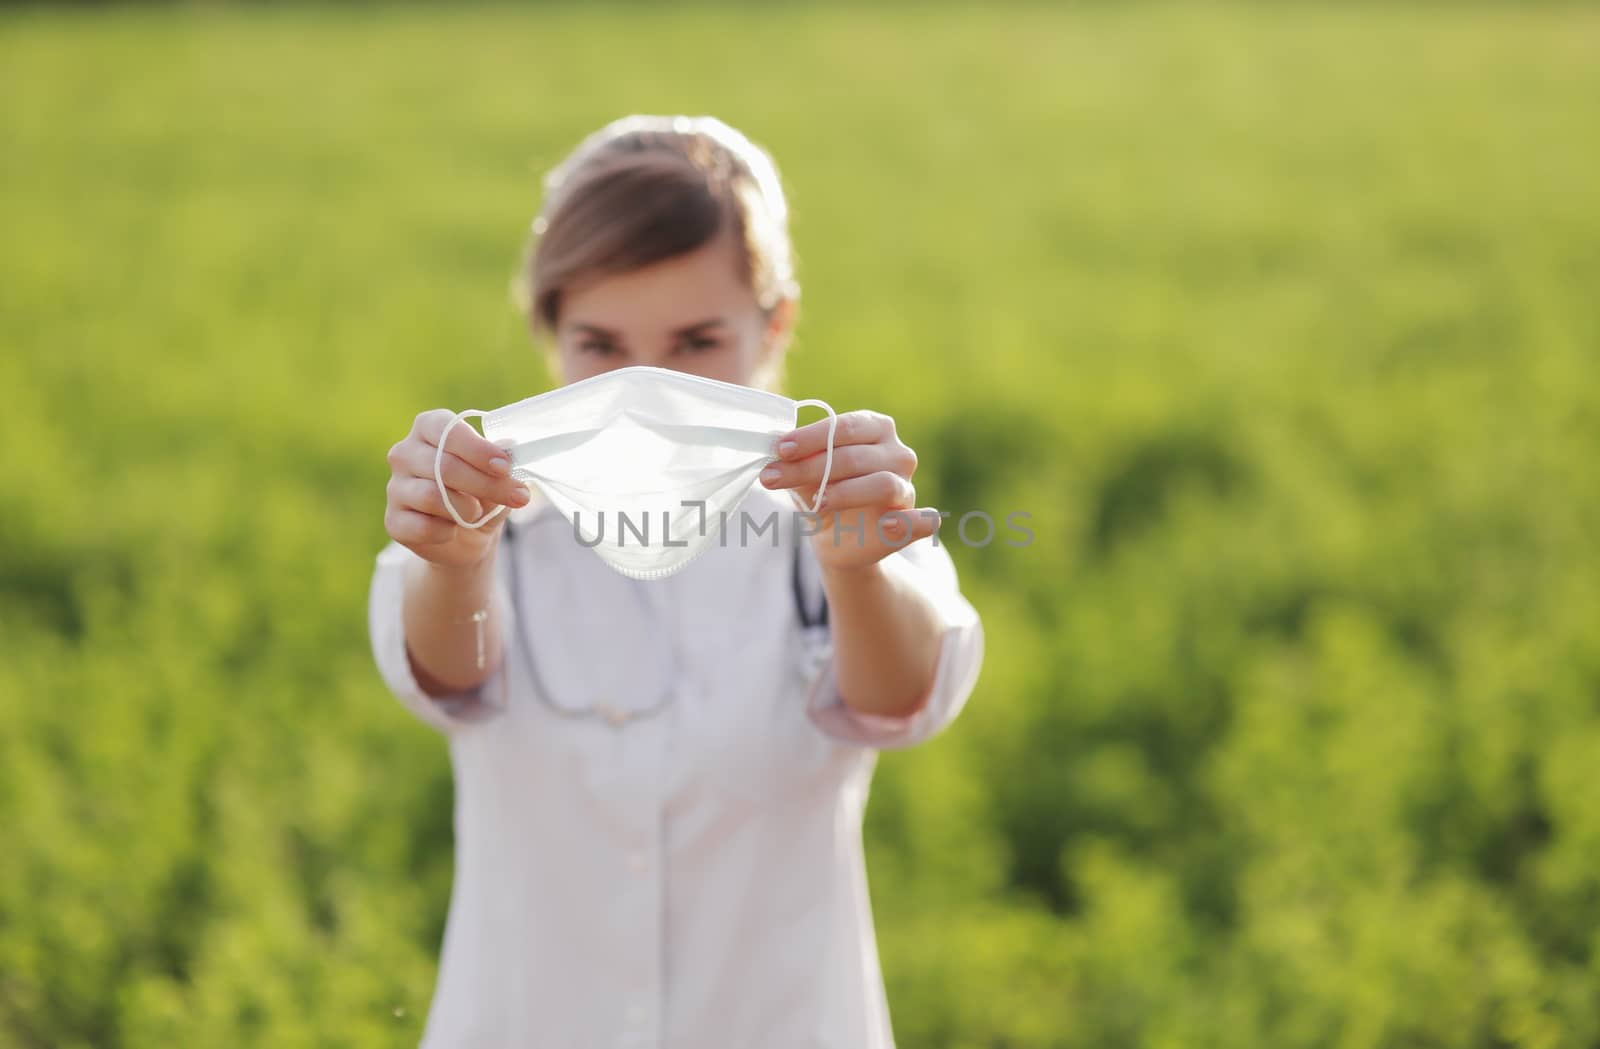 Young woman doctor or nurse showing medical face mask close up. On green grass background. Prevention Covid-19 healthcare concept. Stethoscope over the neck. Female, girl.